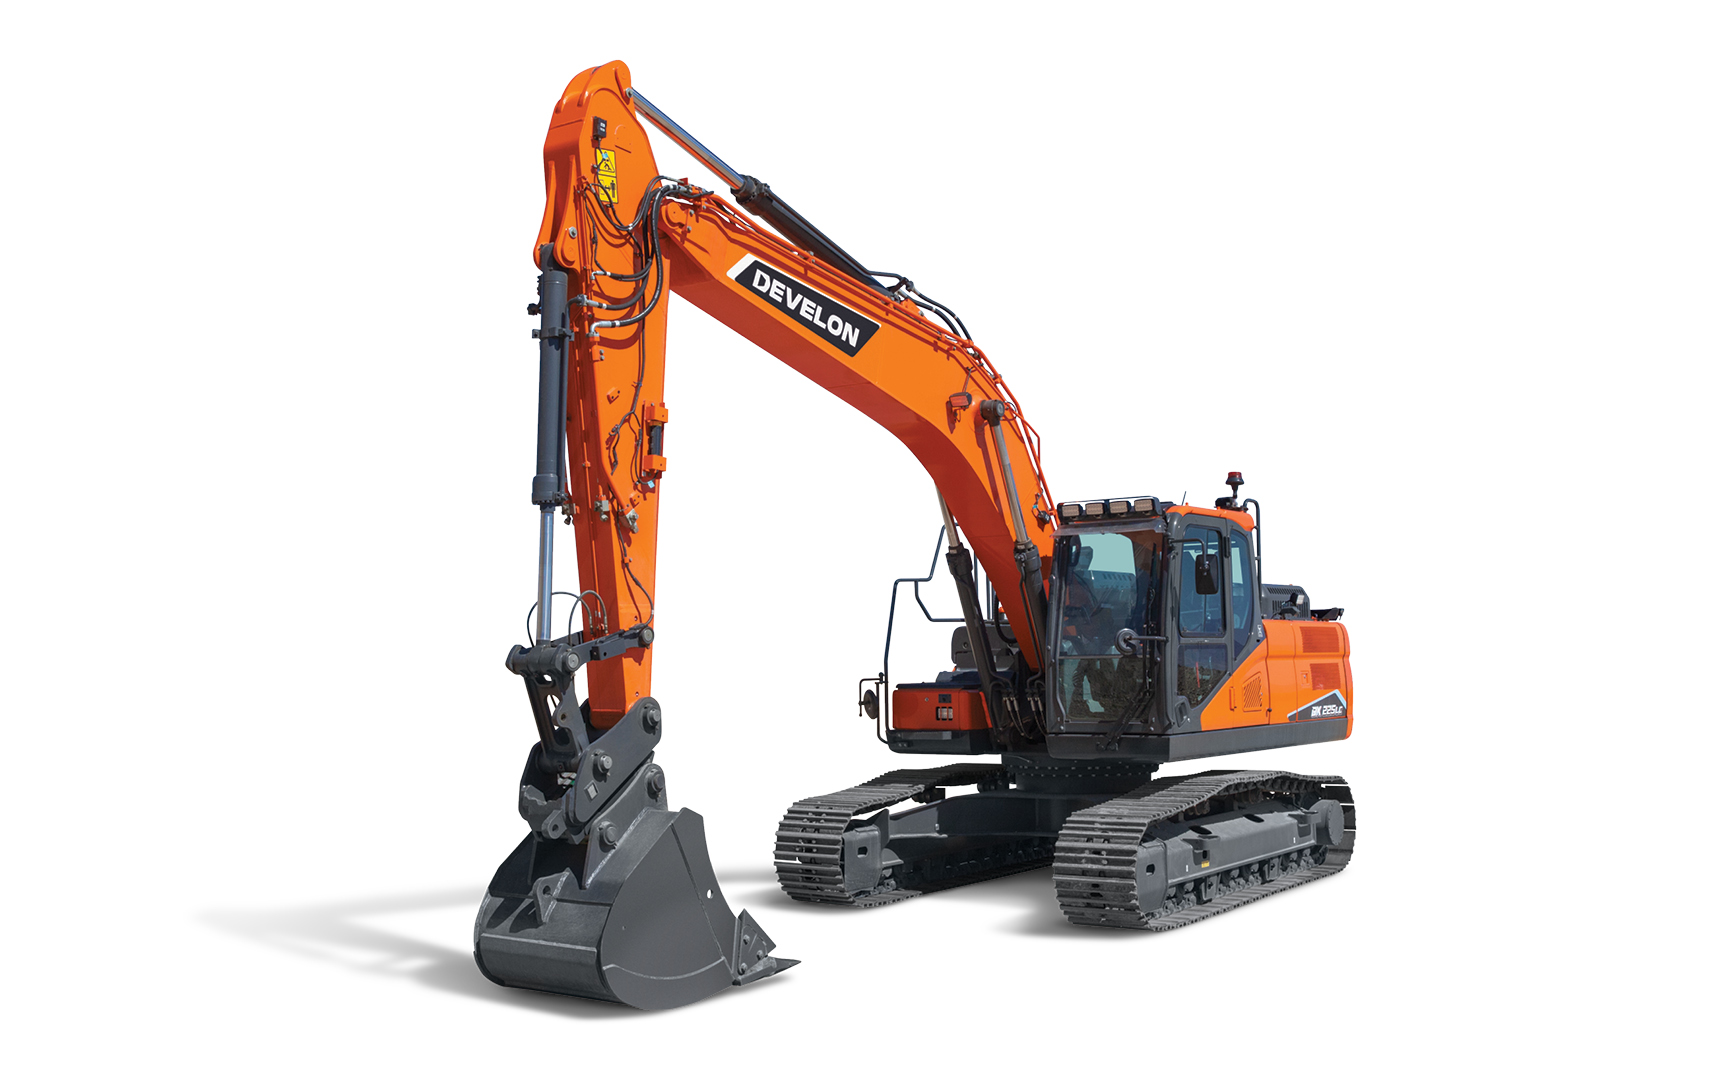 Cut out background of the DEVELON DX225LC-7X crawler excavator.